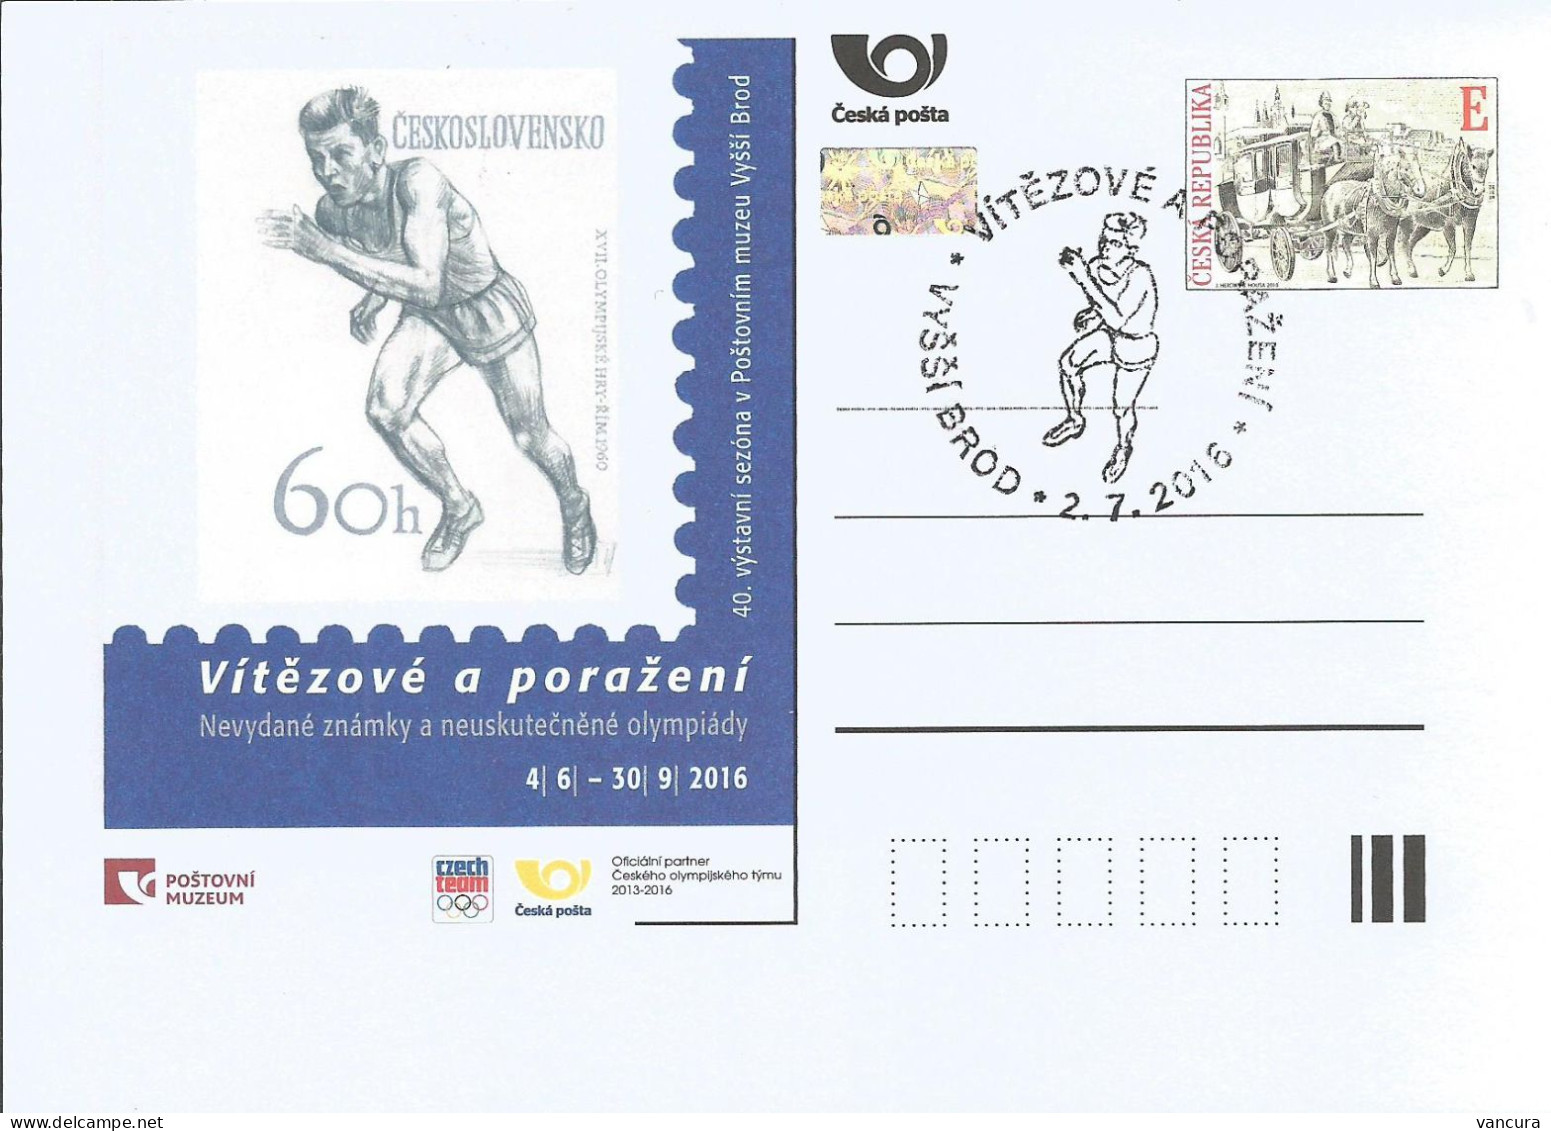 CDV PM 112 Czech Republic Exhibition In Post Museum In Vyssi Brod/Hohenfurth - Unissued Designs Of Olympic Stamps 2016 - Sommer 1960: Rom